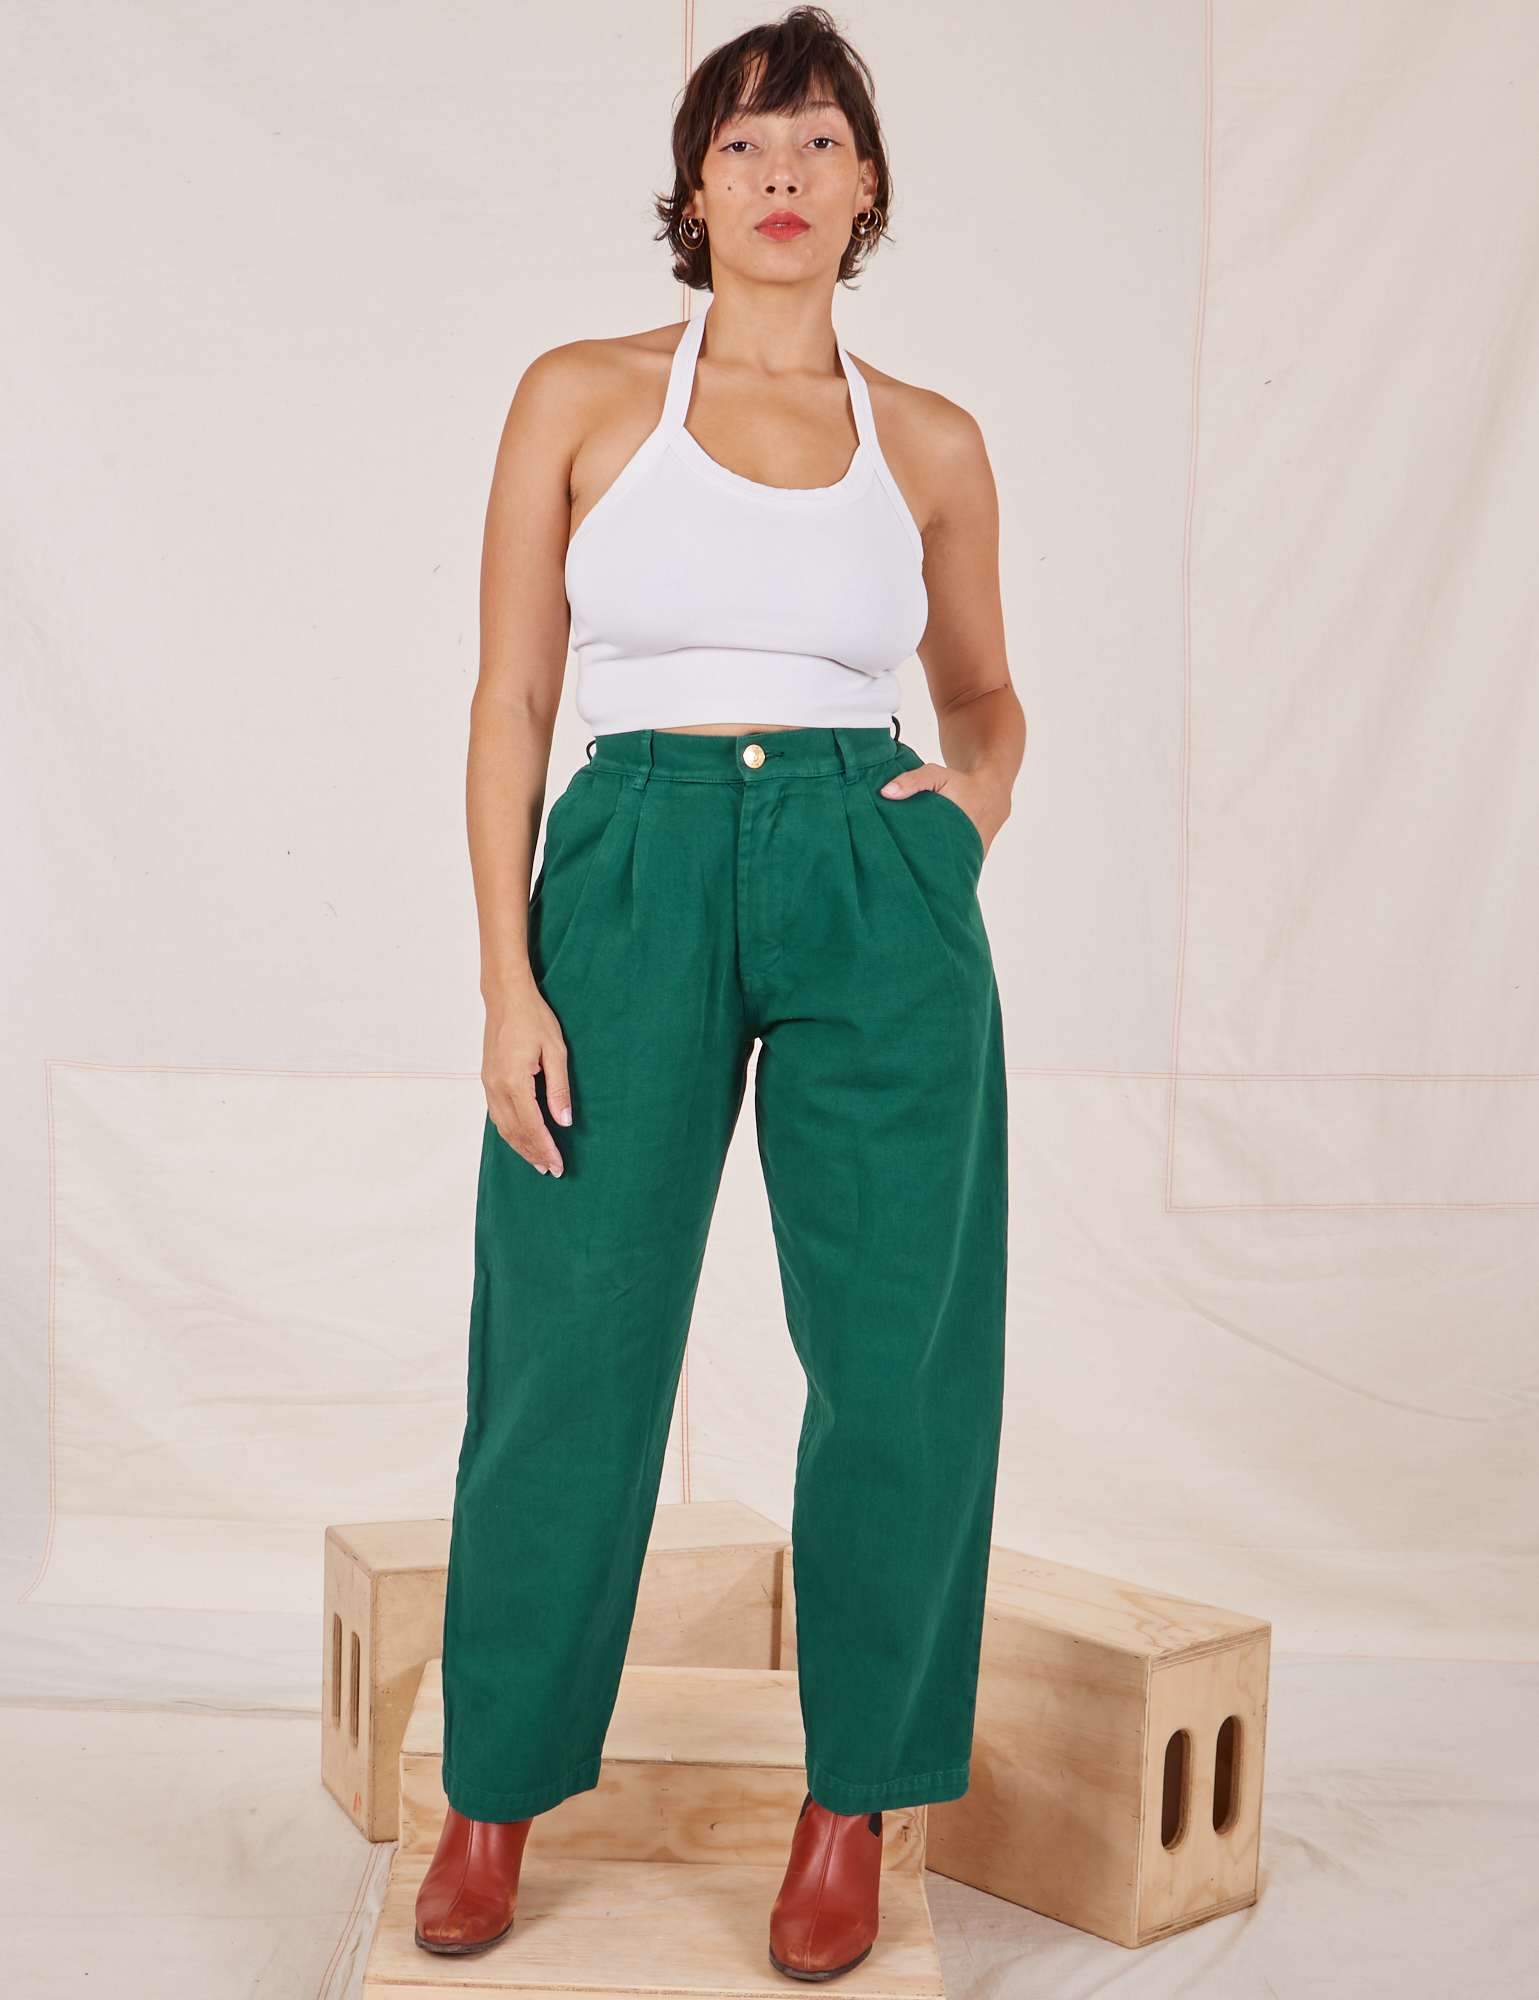 Tiara is 5&#39;4&quot; and wearing XS Heavyweight Trousers in Hunter Green paired with Halter Top in vintage tee off-white